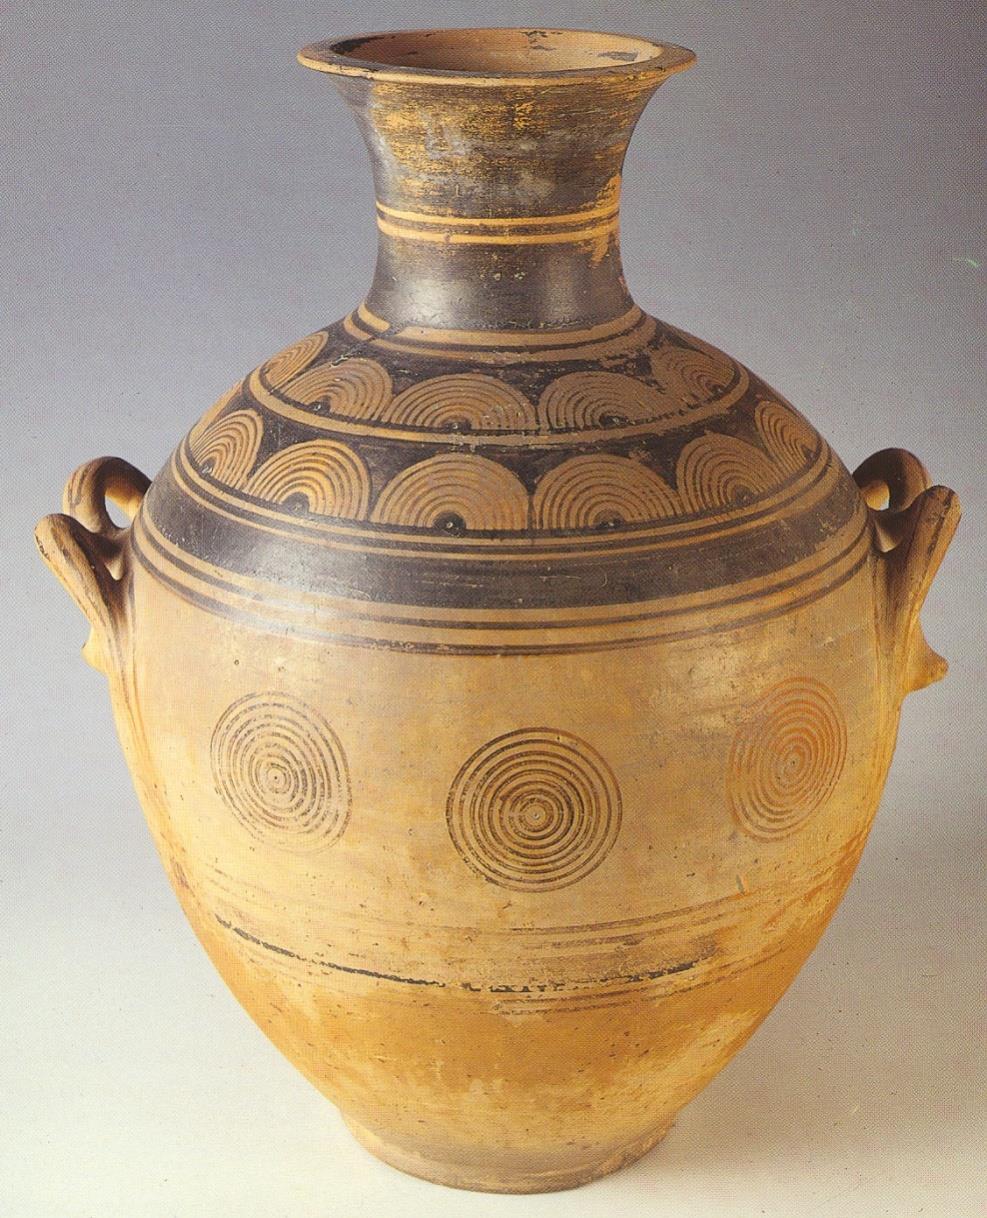 Protogeometric pottery: limited number of geometric motifs: concentric circles and semicircles, bands,